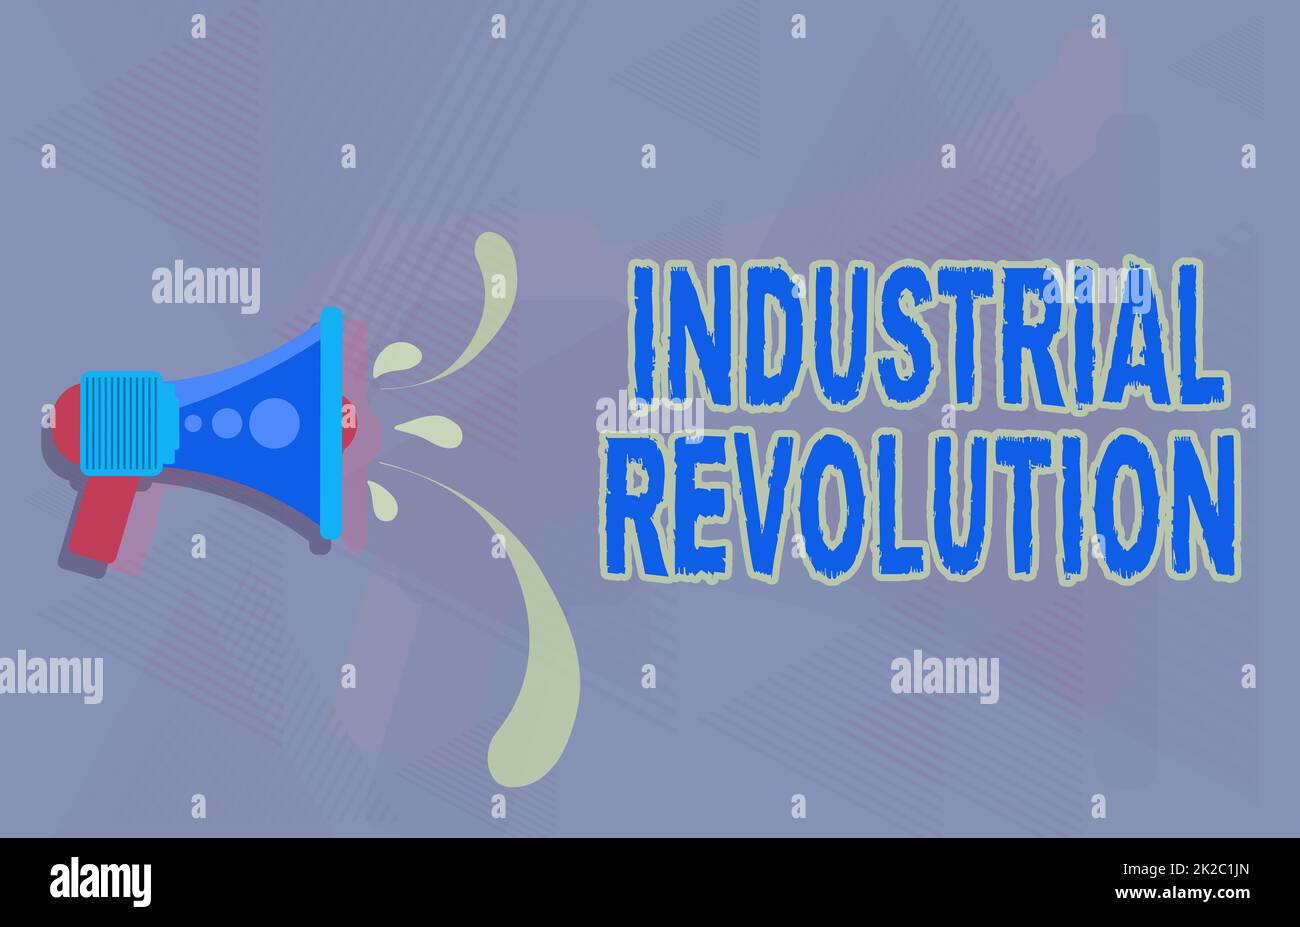 Conceptual display Industrial Revolution. Business concept time during which work done more by machines Illustration Of Megaphone Throwing Out Water Drops Making Announcement. Stock Photo